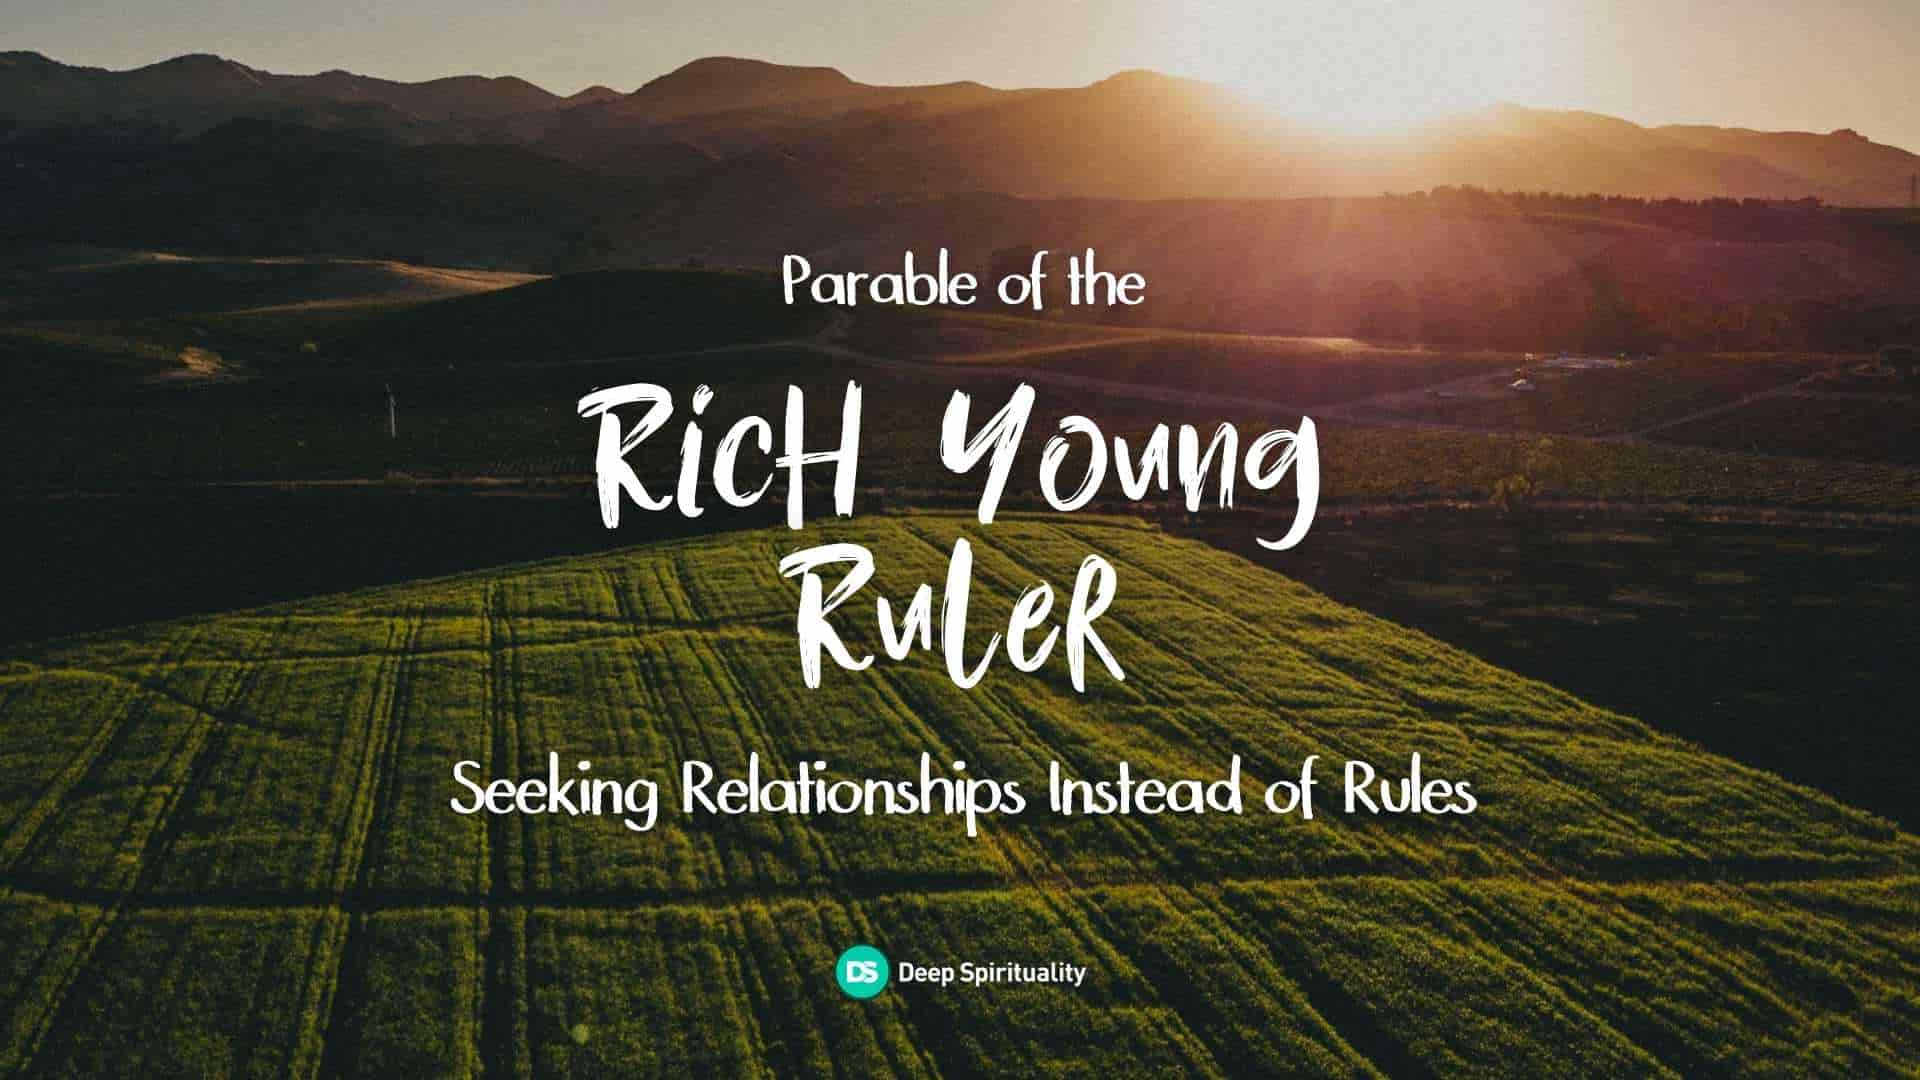 The Rich Young Ruler: How to Stop Seeing Rules and Start Seeing Relationship 2